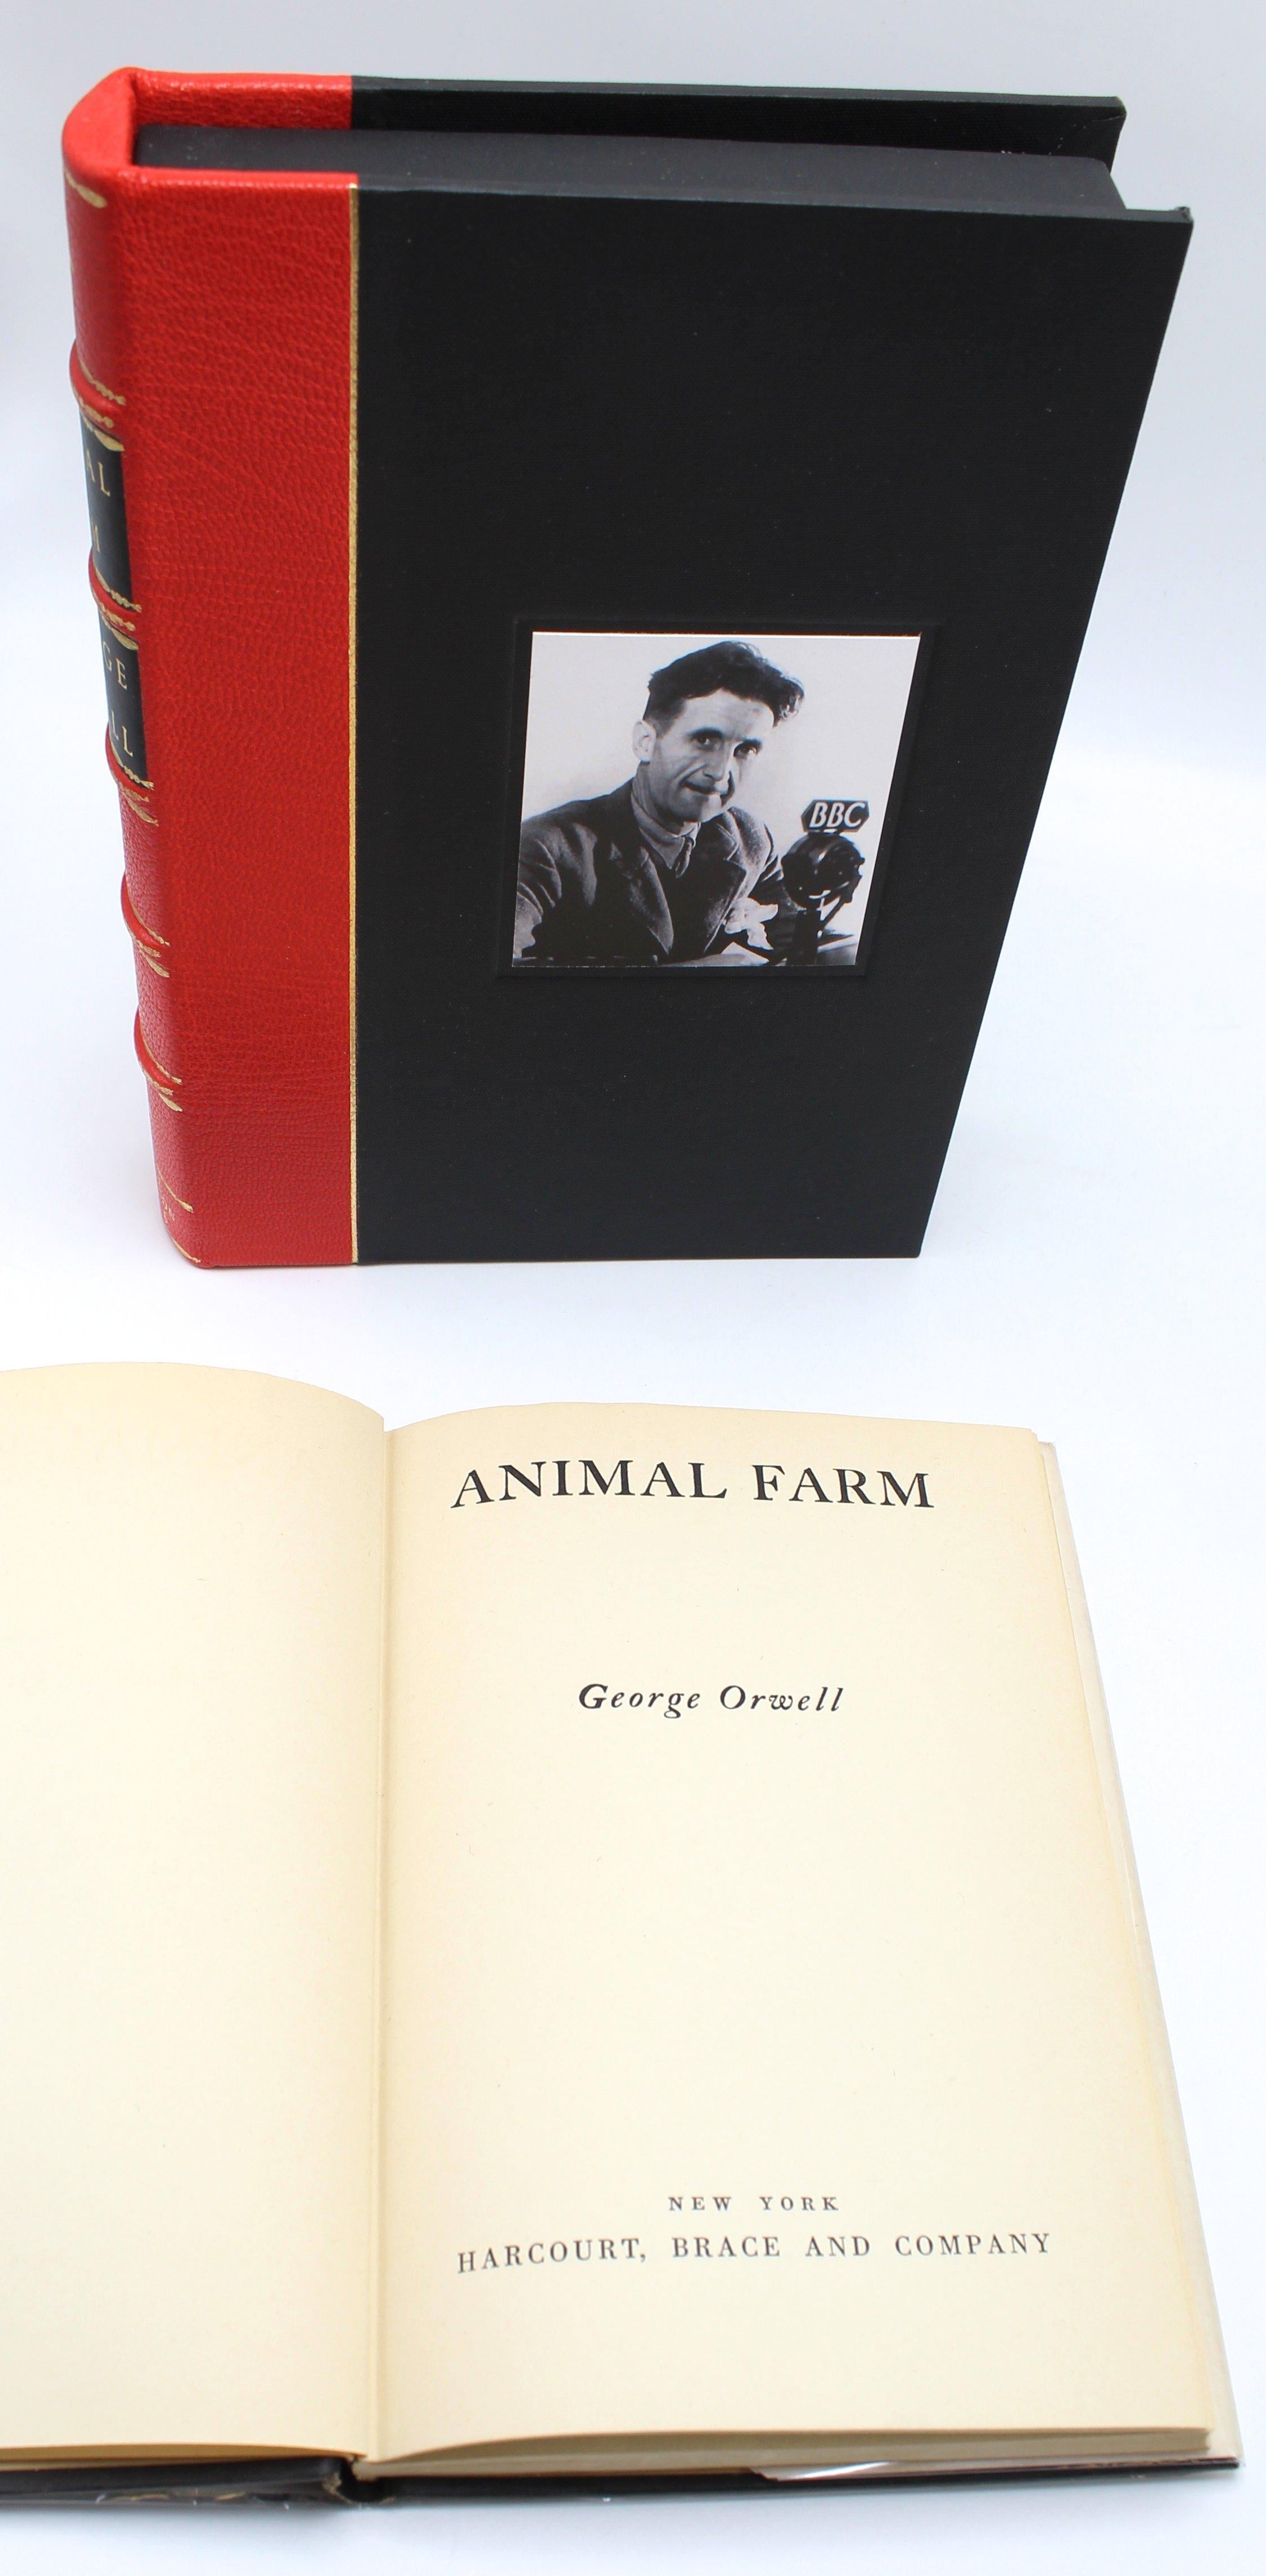 Orwell, George. Animal Farm. New York: Harcourt, Brace and Co., 1946. First American edition. First issue dust jacket with mylar cover. Presented in a custom clamshell.

This first American edition of Animal Farm features the original 1946 dust